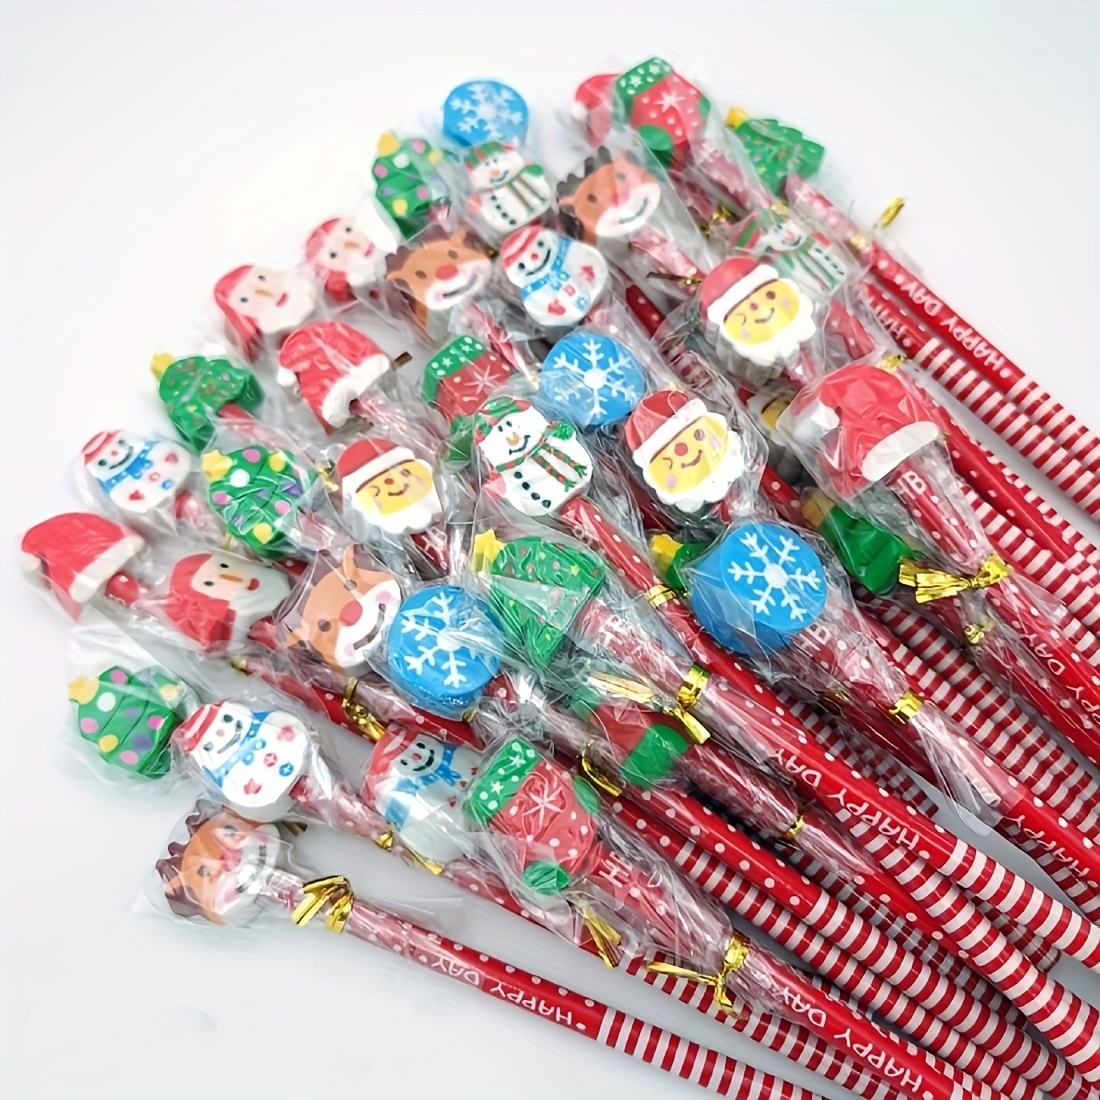 24pcs Christmas Pencil with Eraser Cartoon Stationary Pencils for Kids  Students Random Style